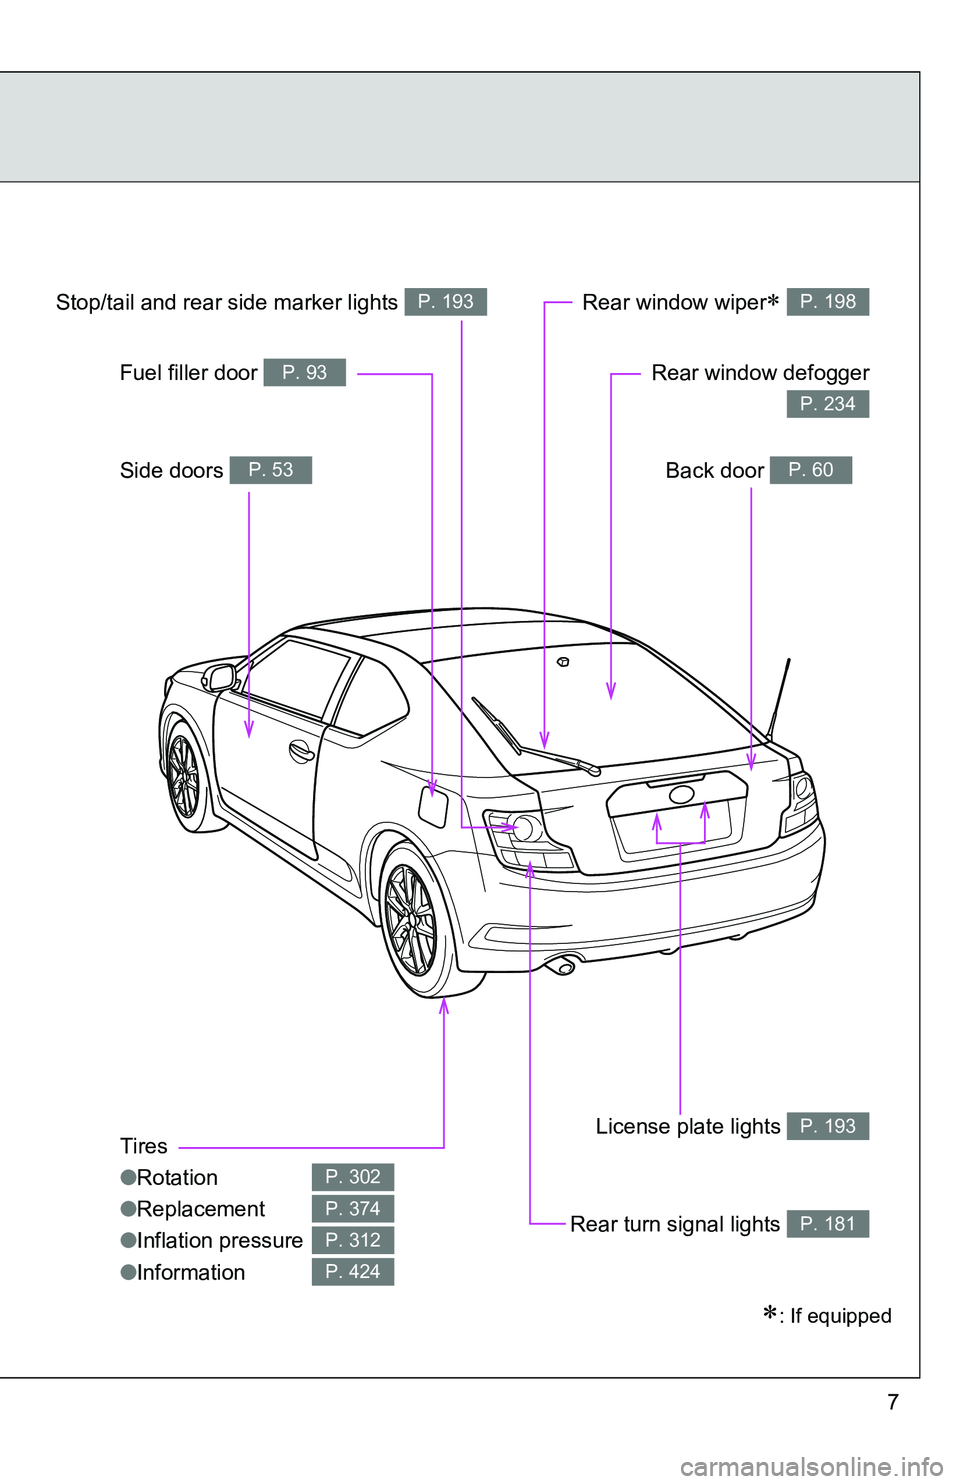 TOYOTA tC 2011  Owners Manual (in English) 7
: If equipped
Tires
●Rotation
● Replacement
● Inflation pressure
● Information
P. 302
P. 374
P. 312
P. 424
License plate lights P. 193
Rear turn signal lights P. 181
Side doors P. 53
Stop